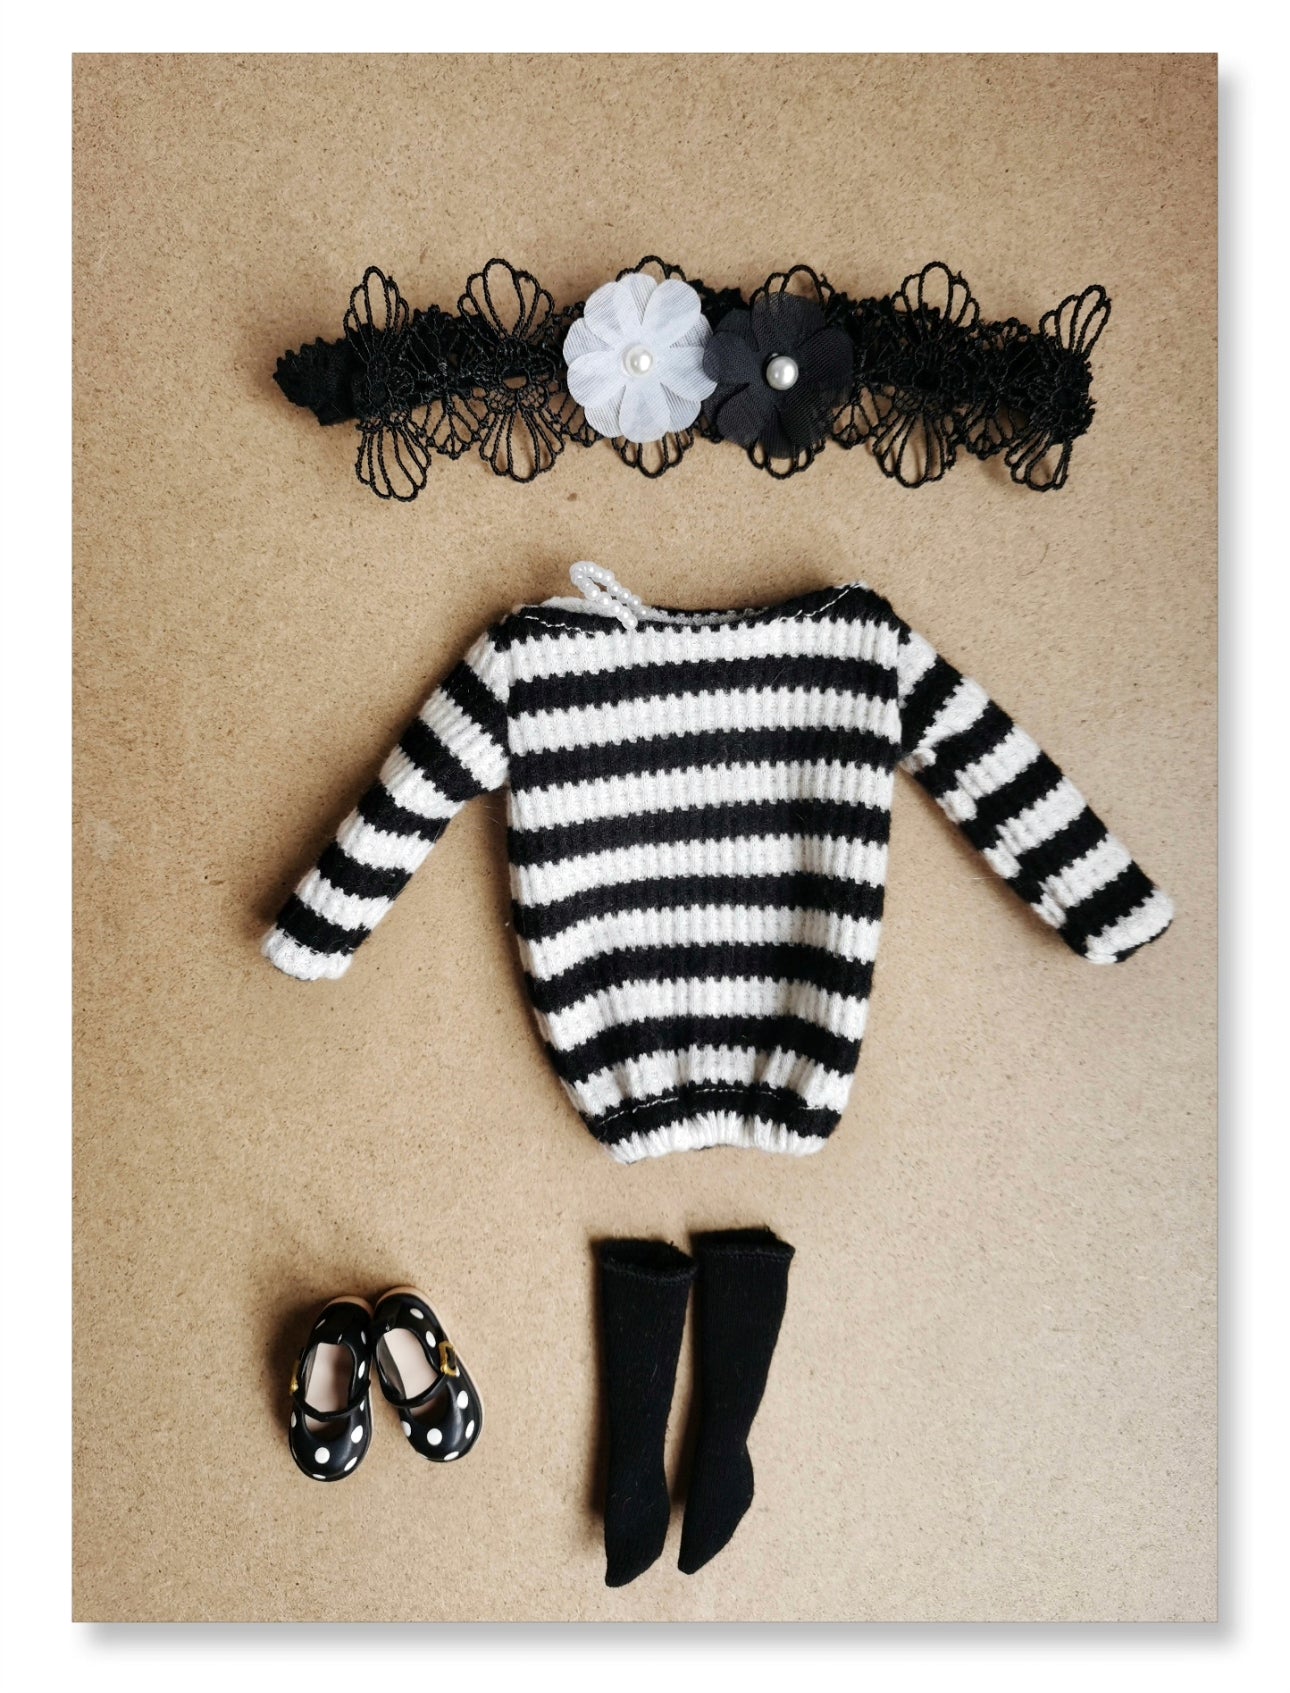 Handmade Outfit  Dress  for Blythe,BJD 1/6 Doll Clothes Customized 014